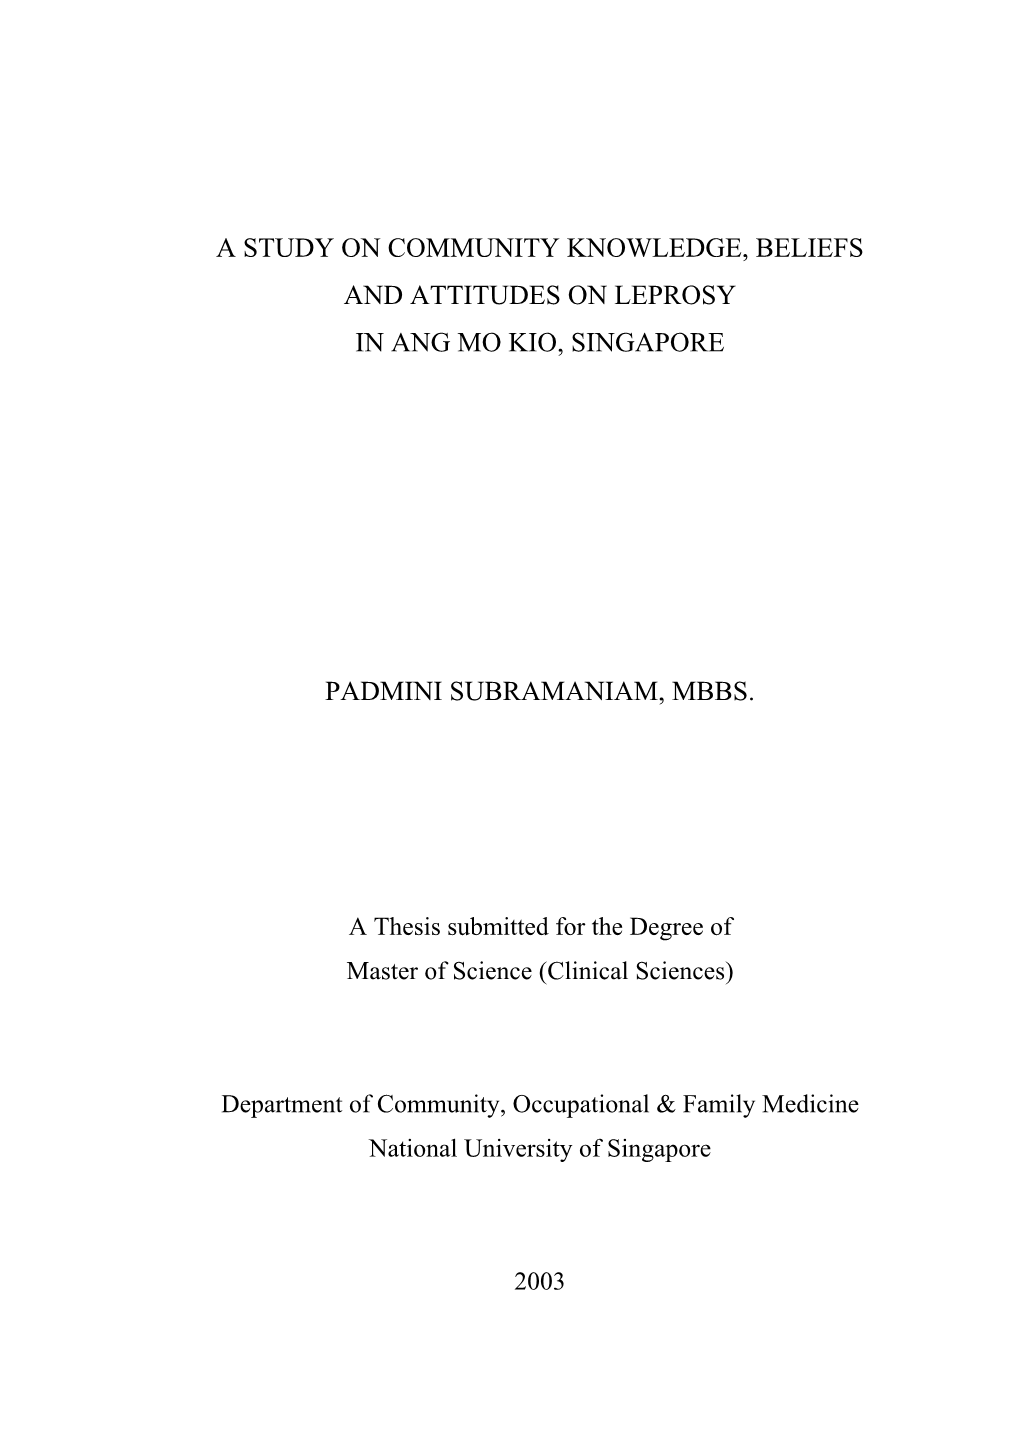 A Study on Community Knowledge, Beliefs and Attitudes on Leprosy in Ang Mo Kio, Singapore